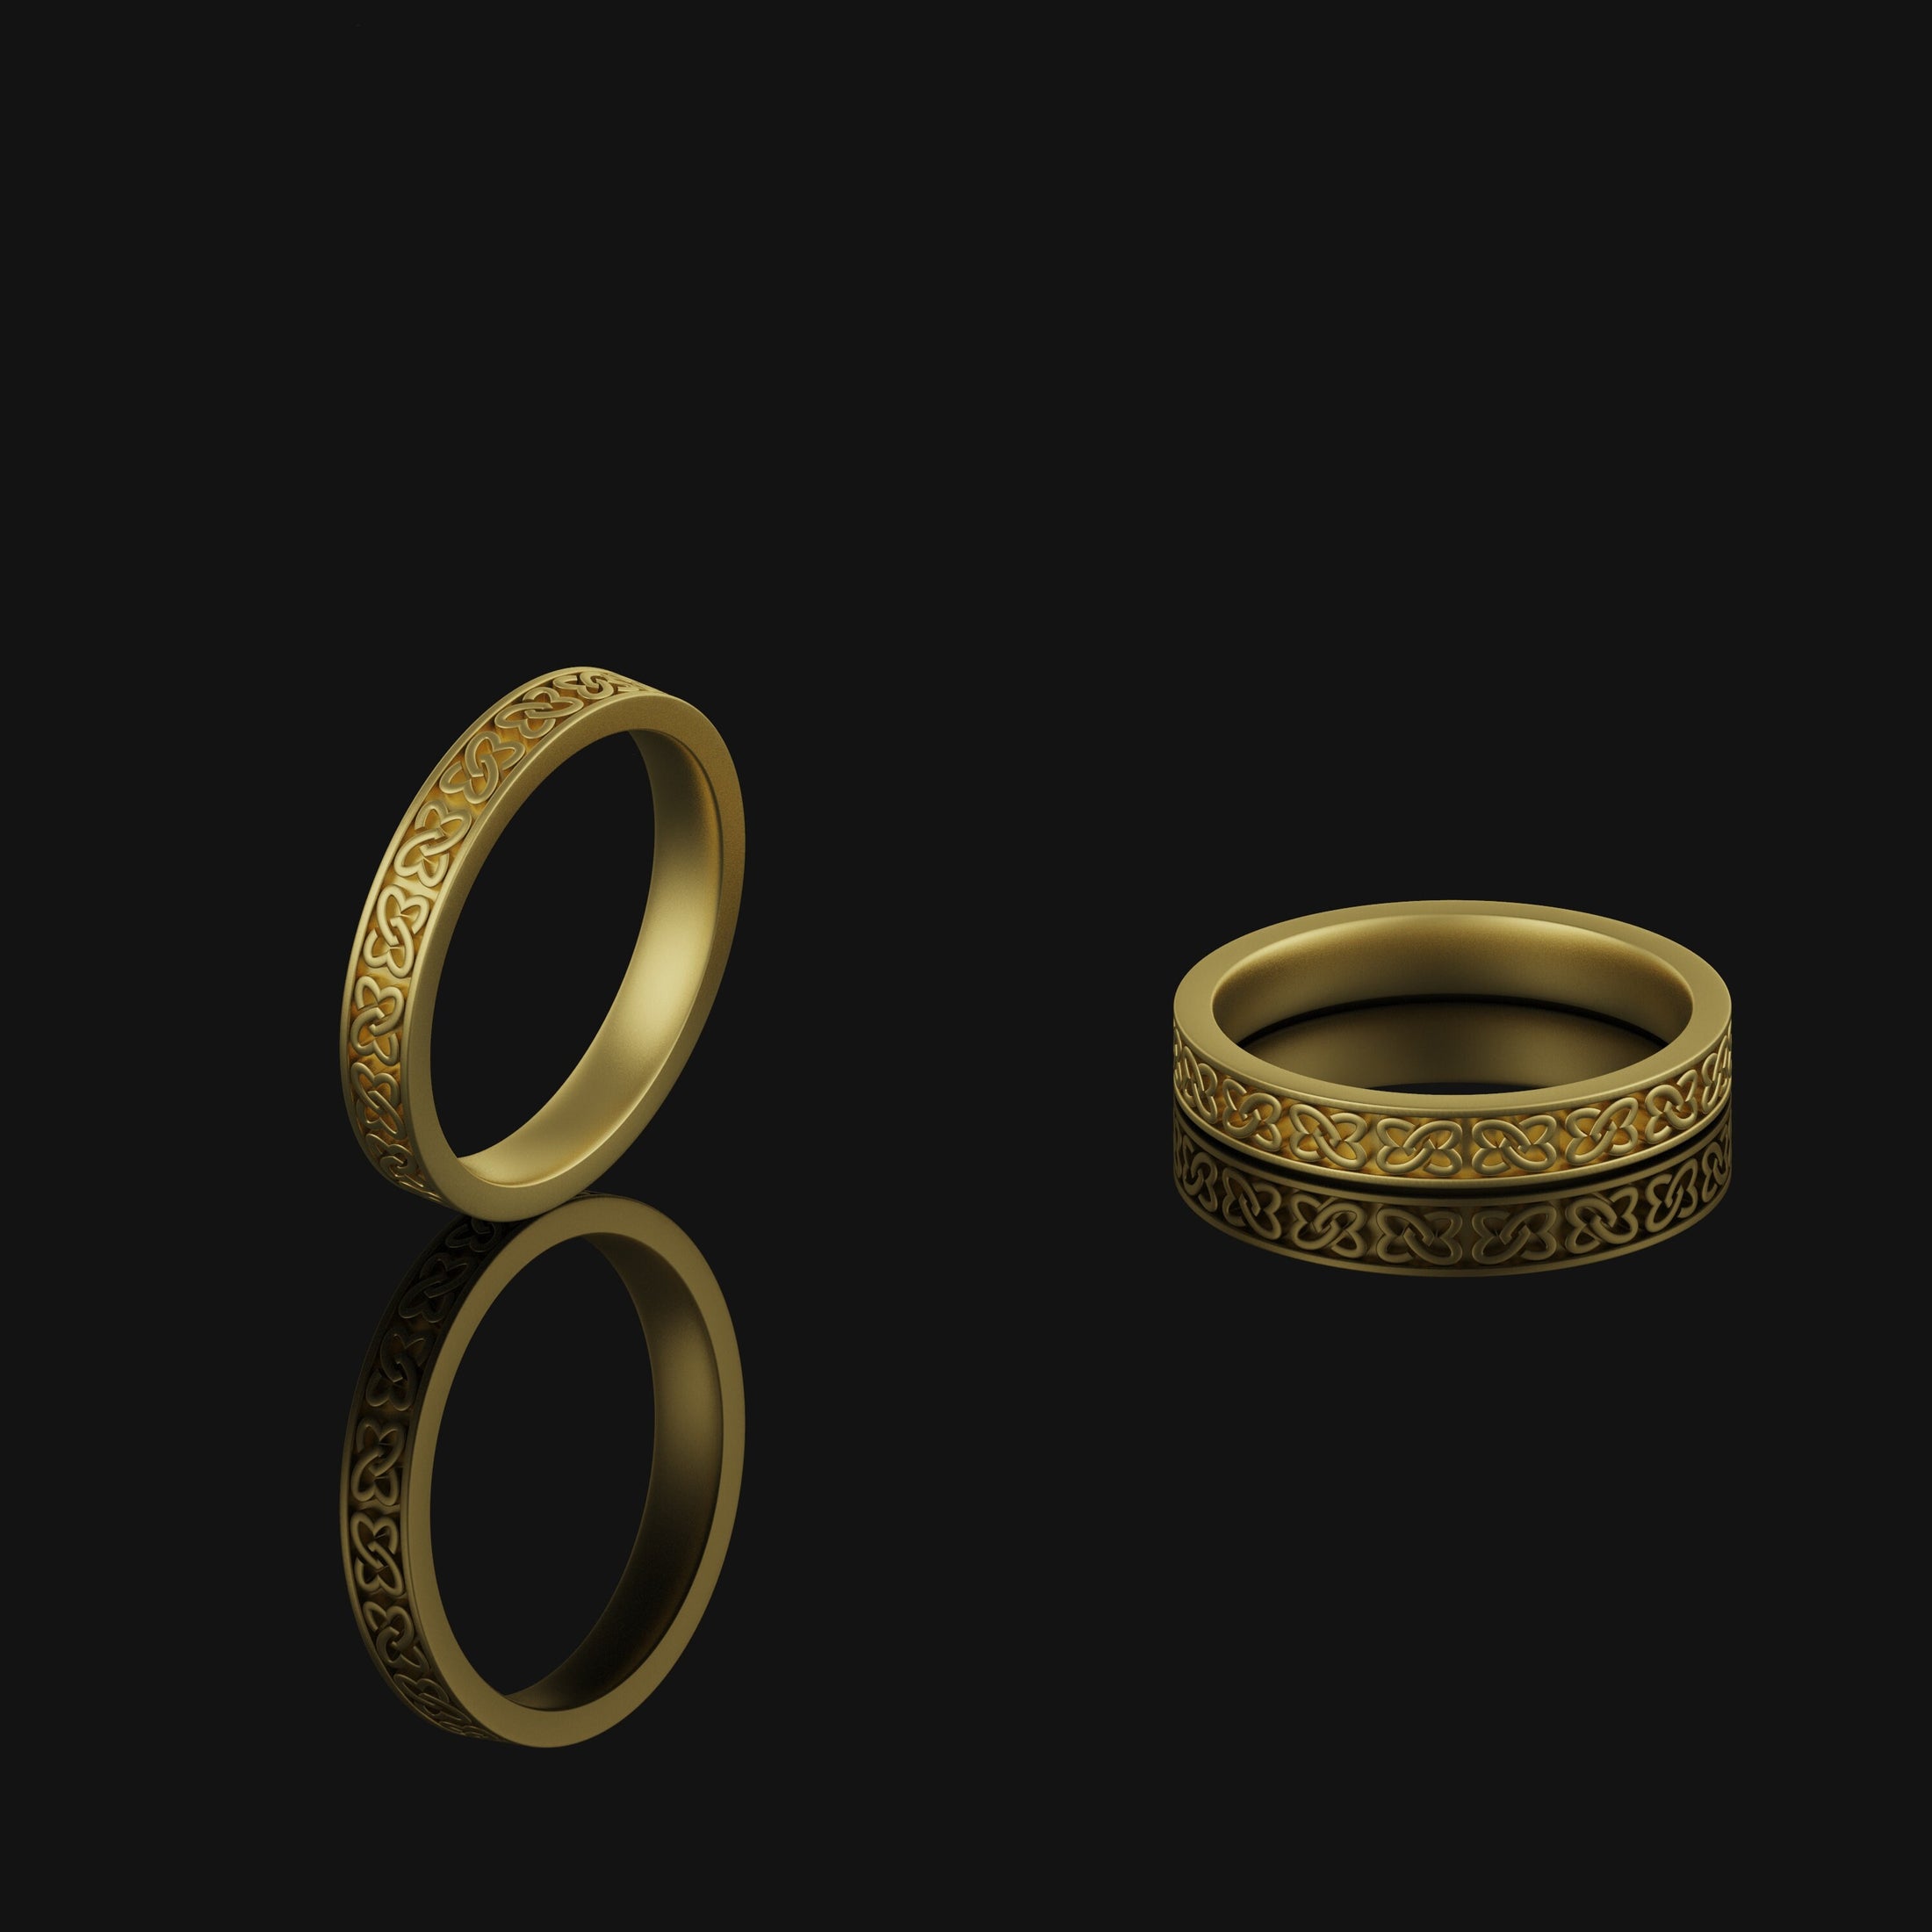 Knot of Love Band - Engravable Gold Finish